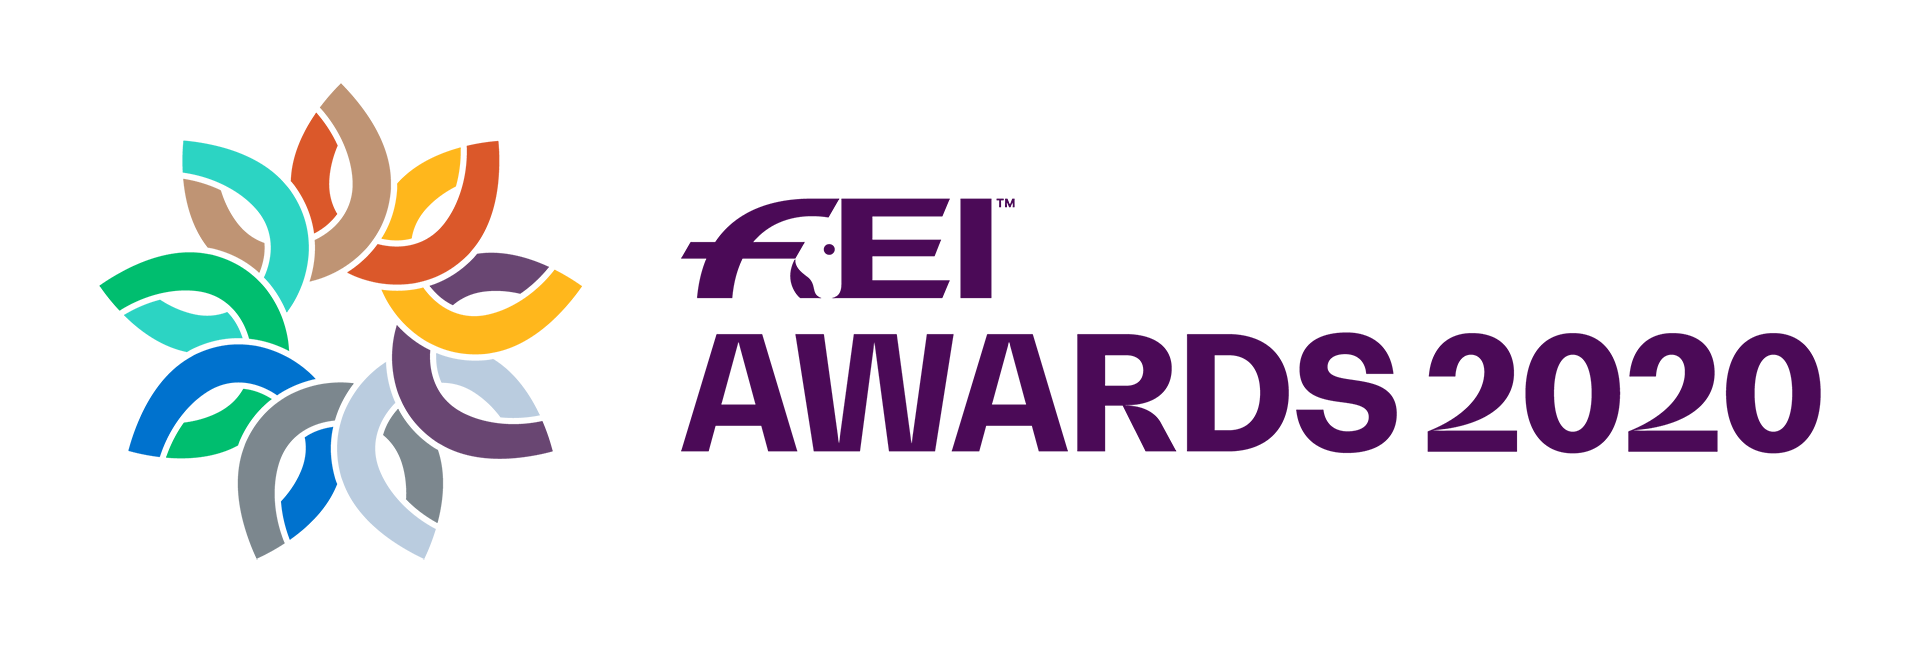 The FEI Awards will celebrate athletes from the last decade this year ©FEI